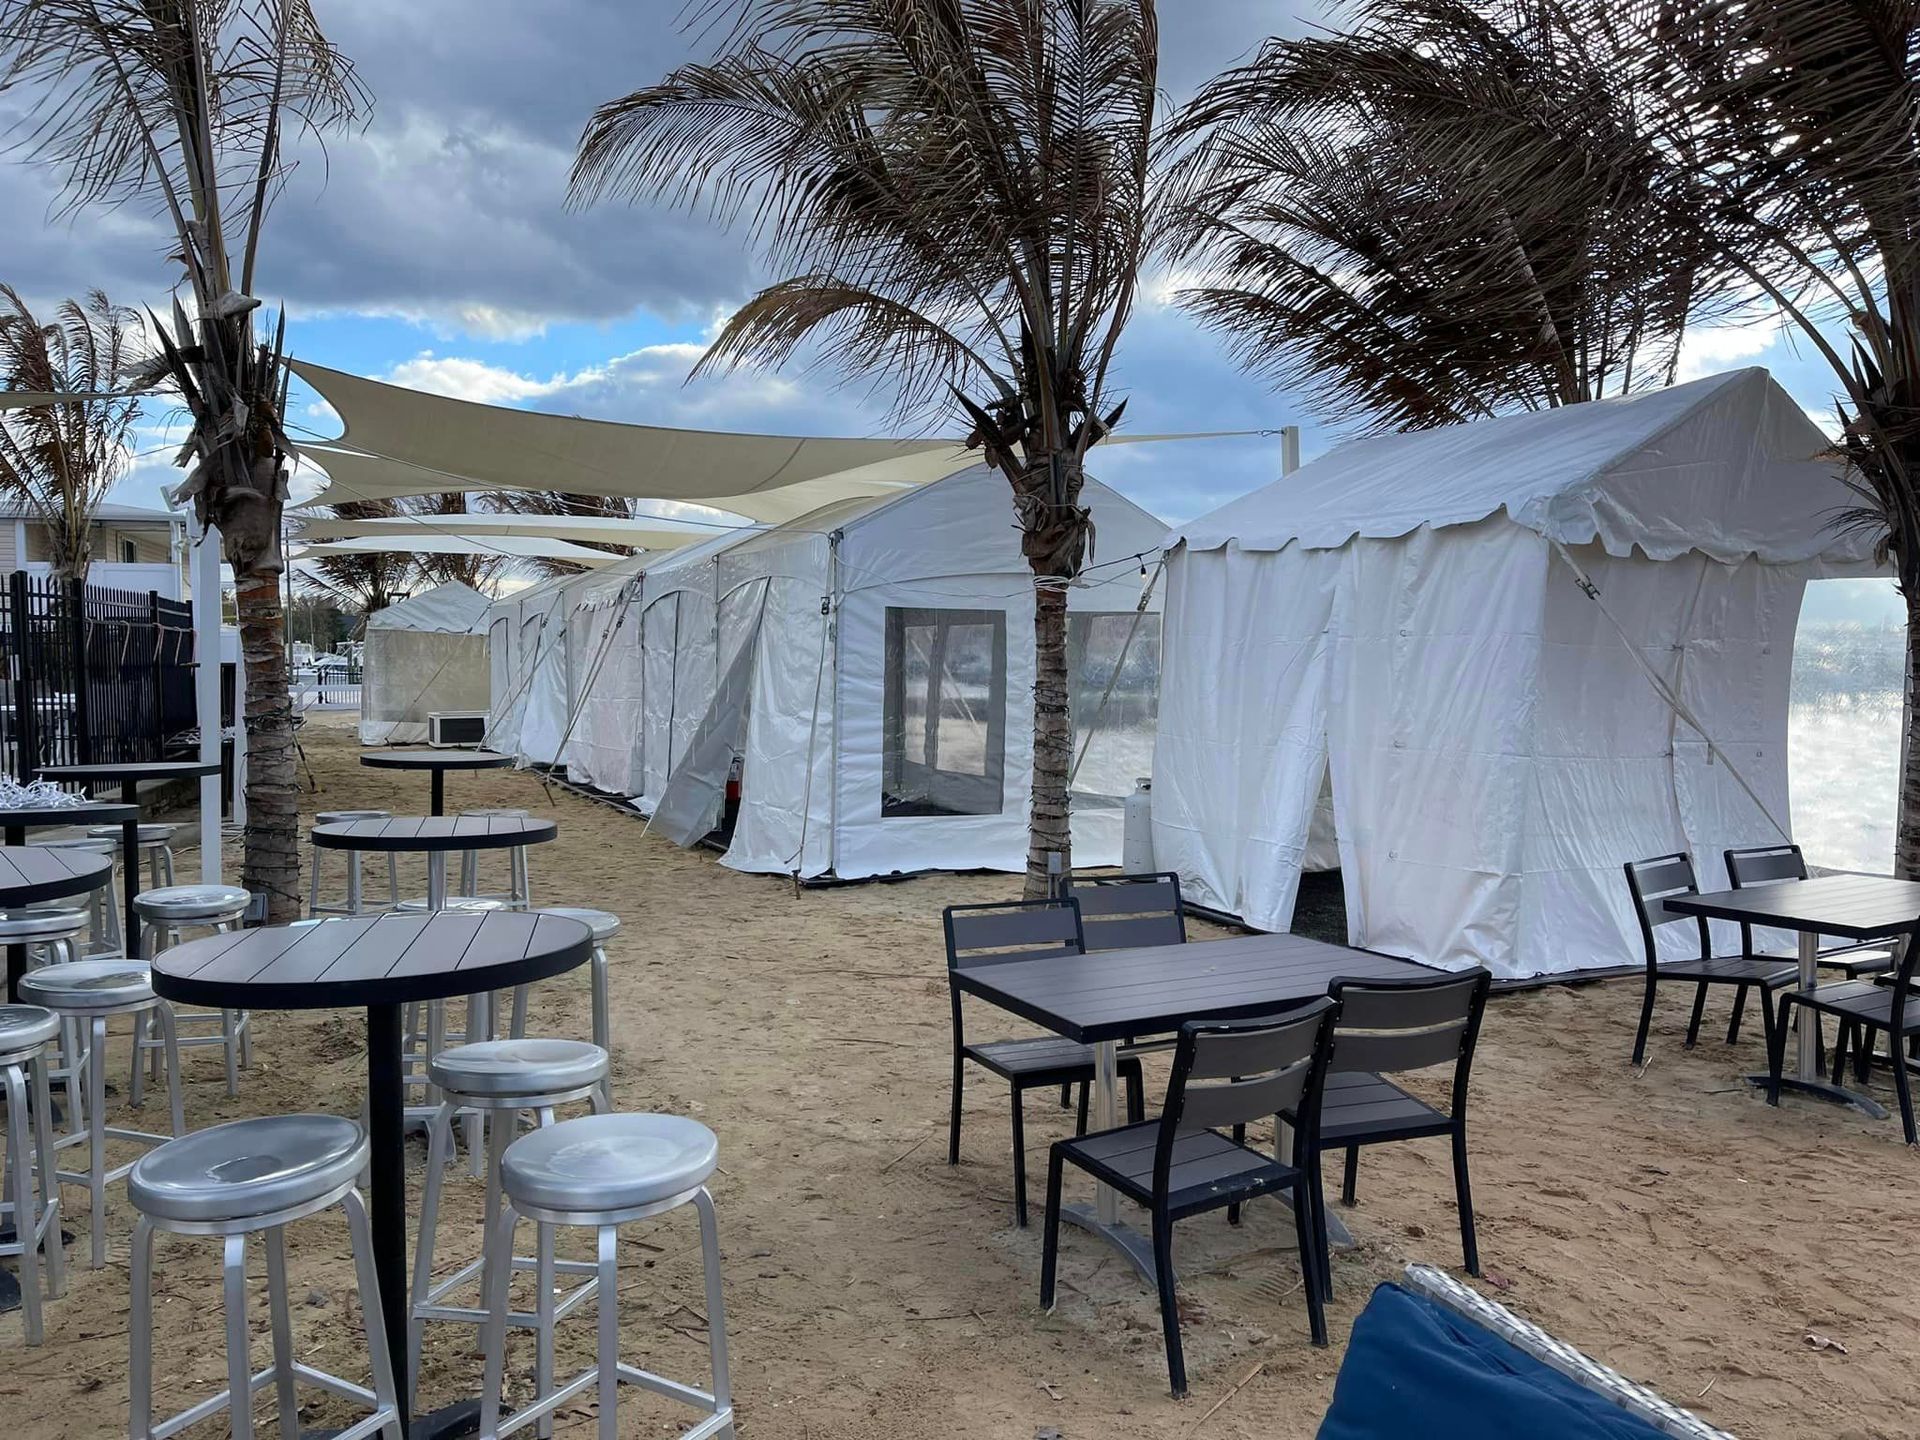 Benefits of Renting an Event Tent for Your Outdoor Celebration